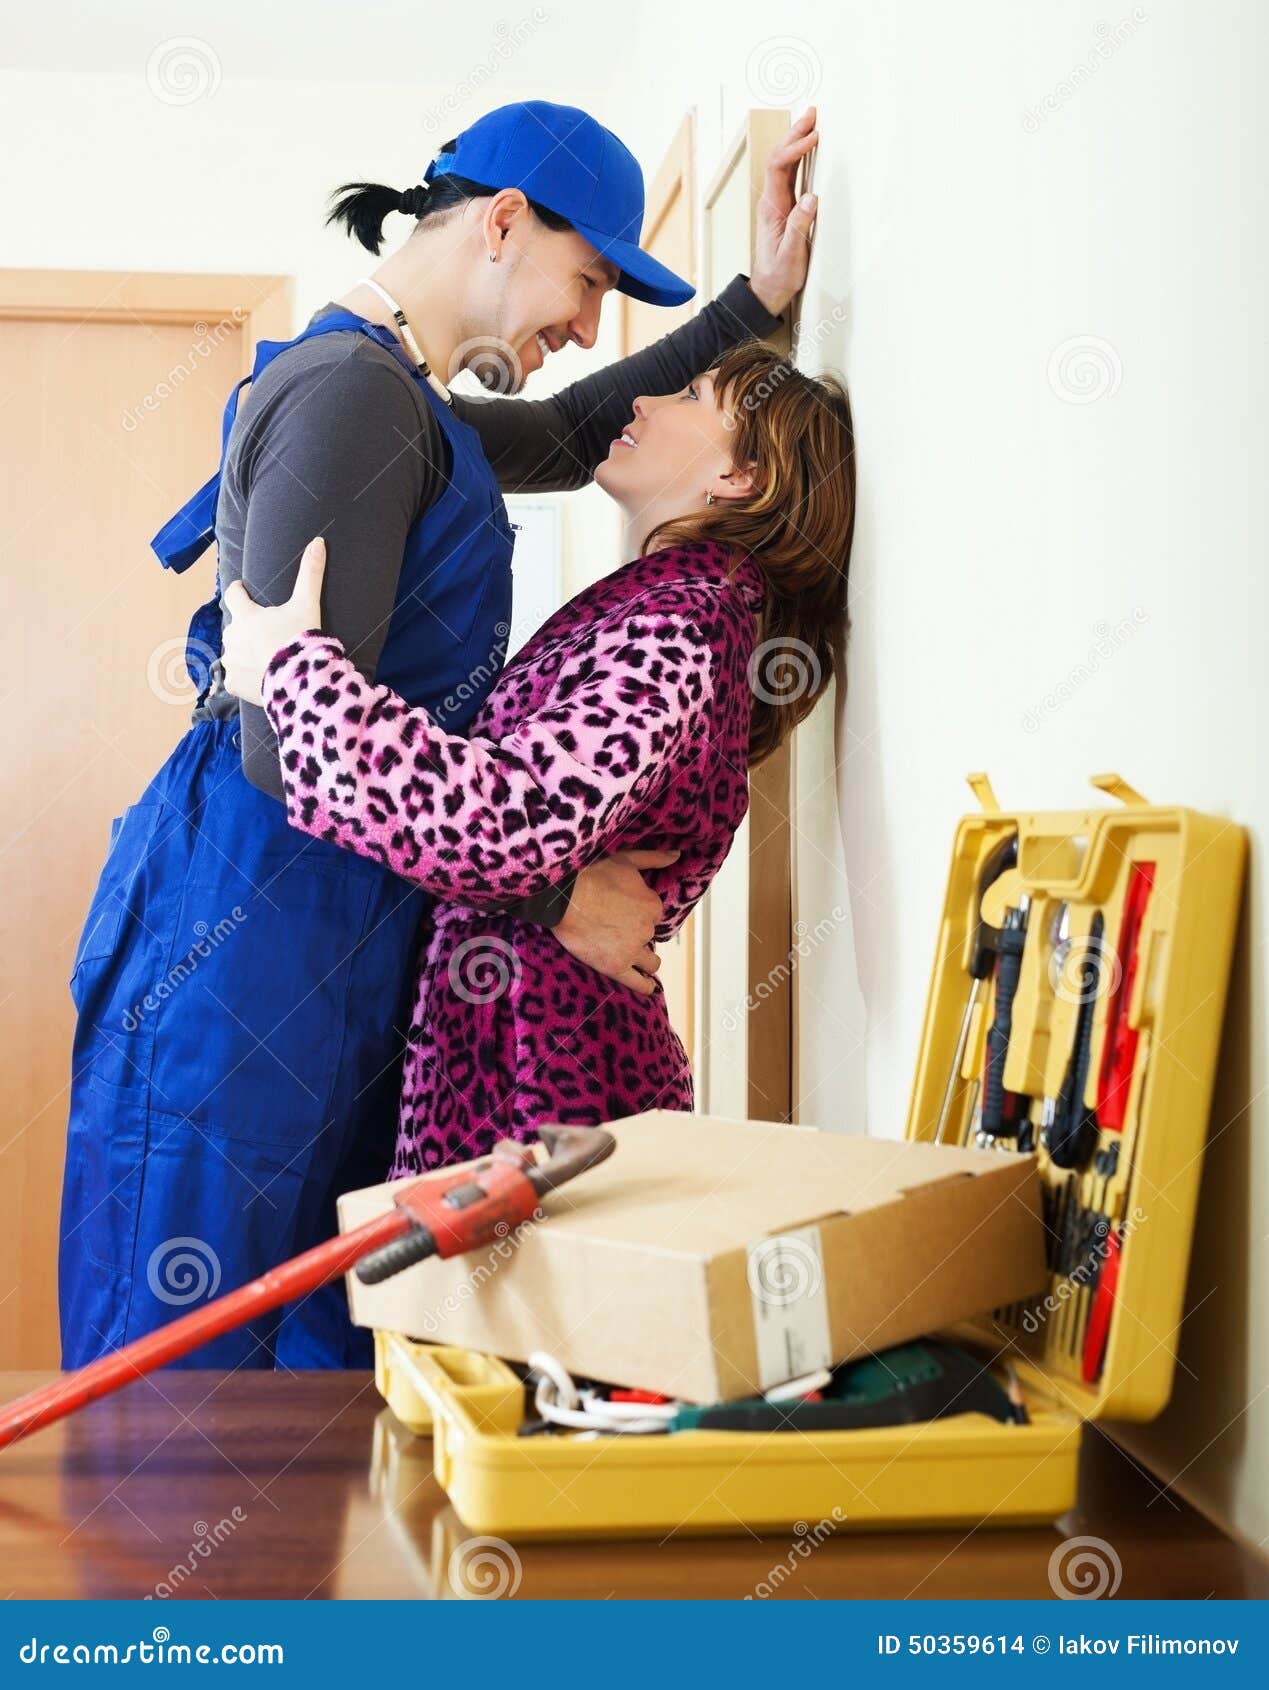 Plumber Having Flirt with Young Girl Stock Photo photo picture